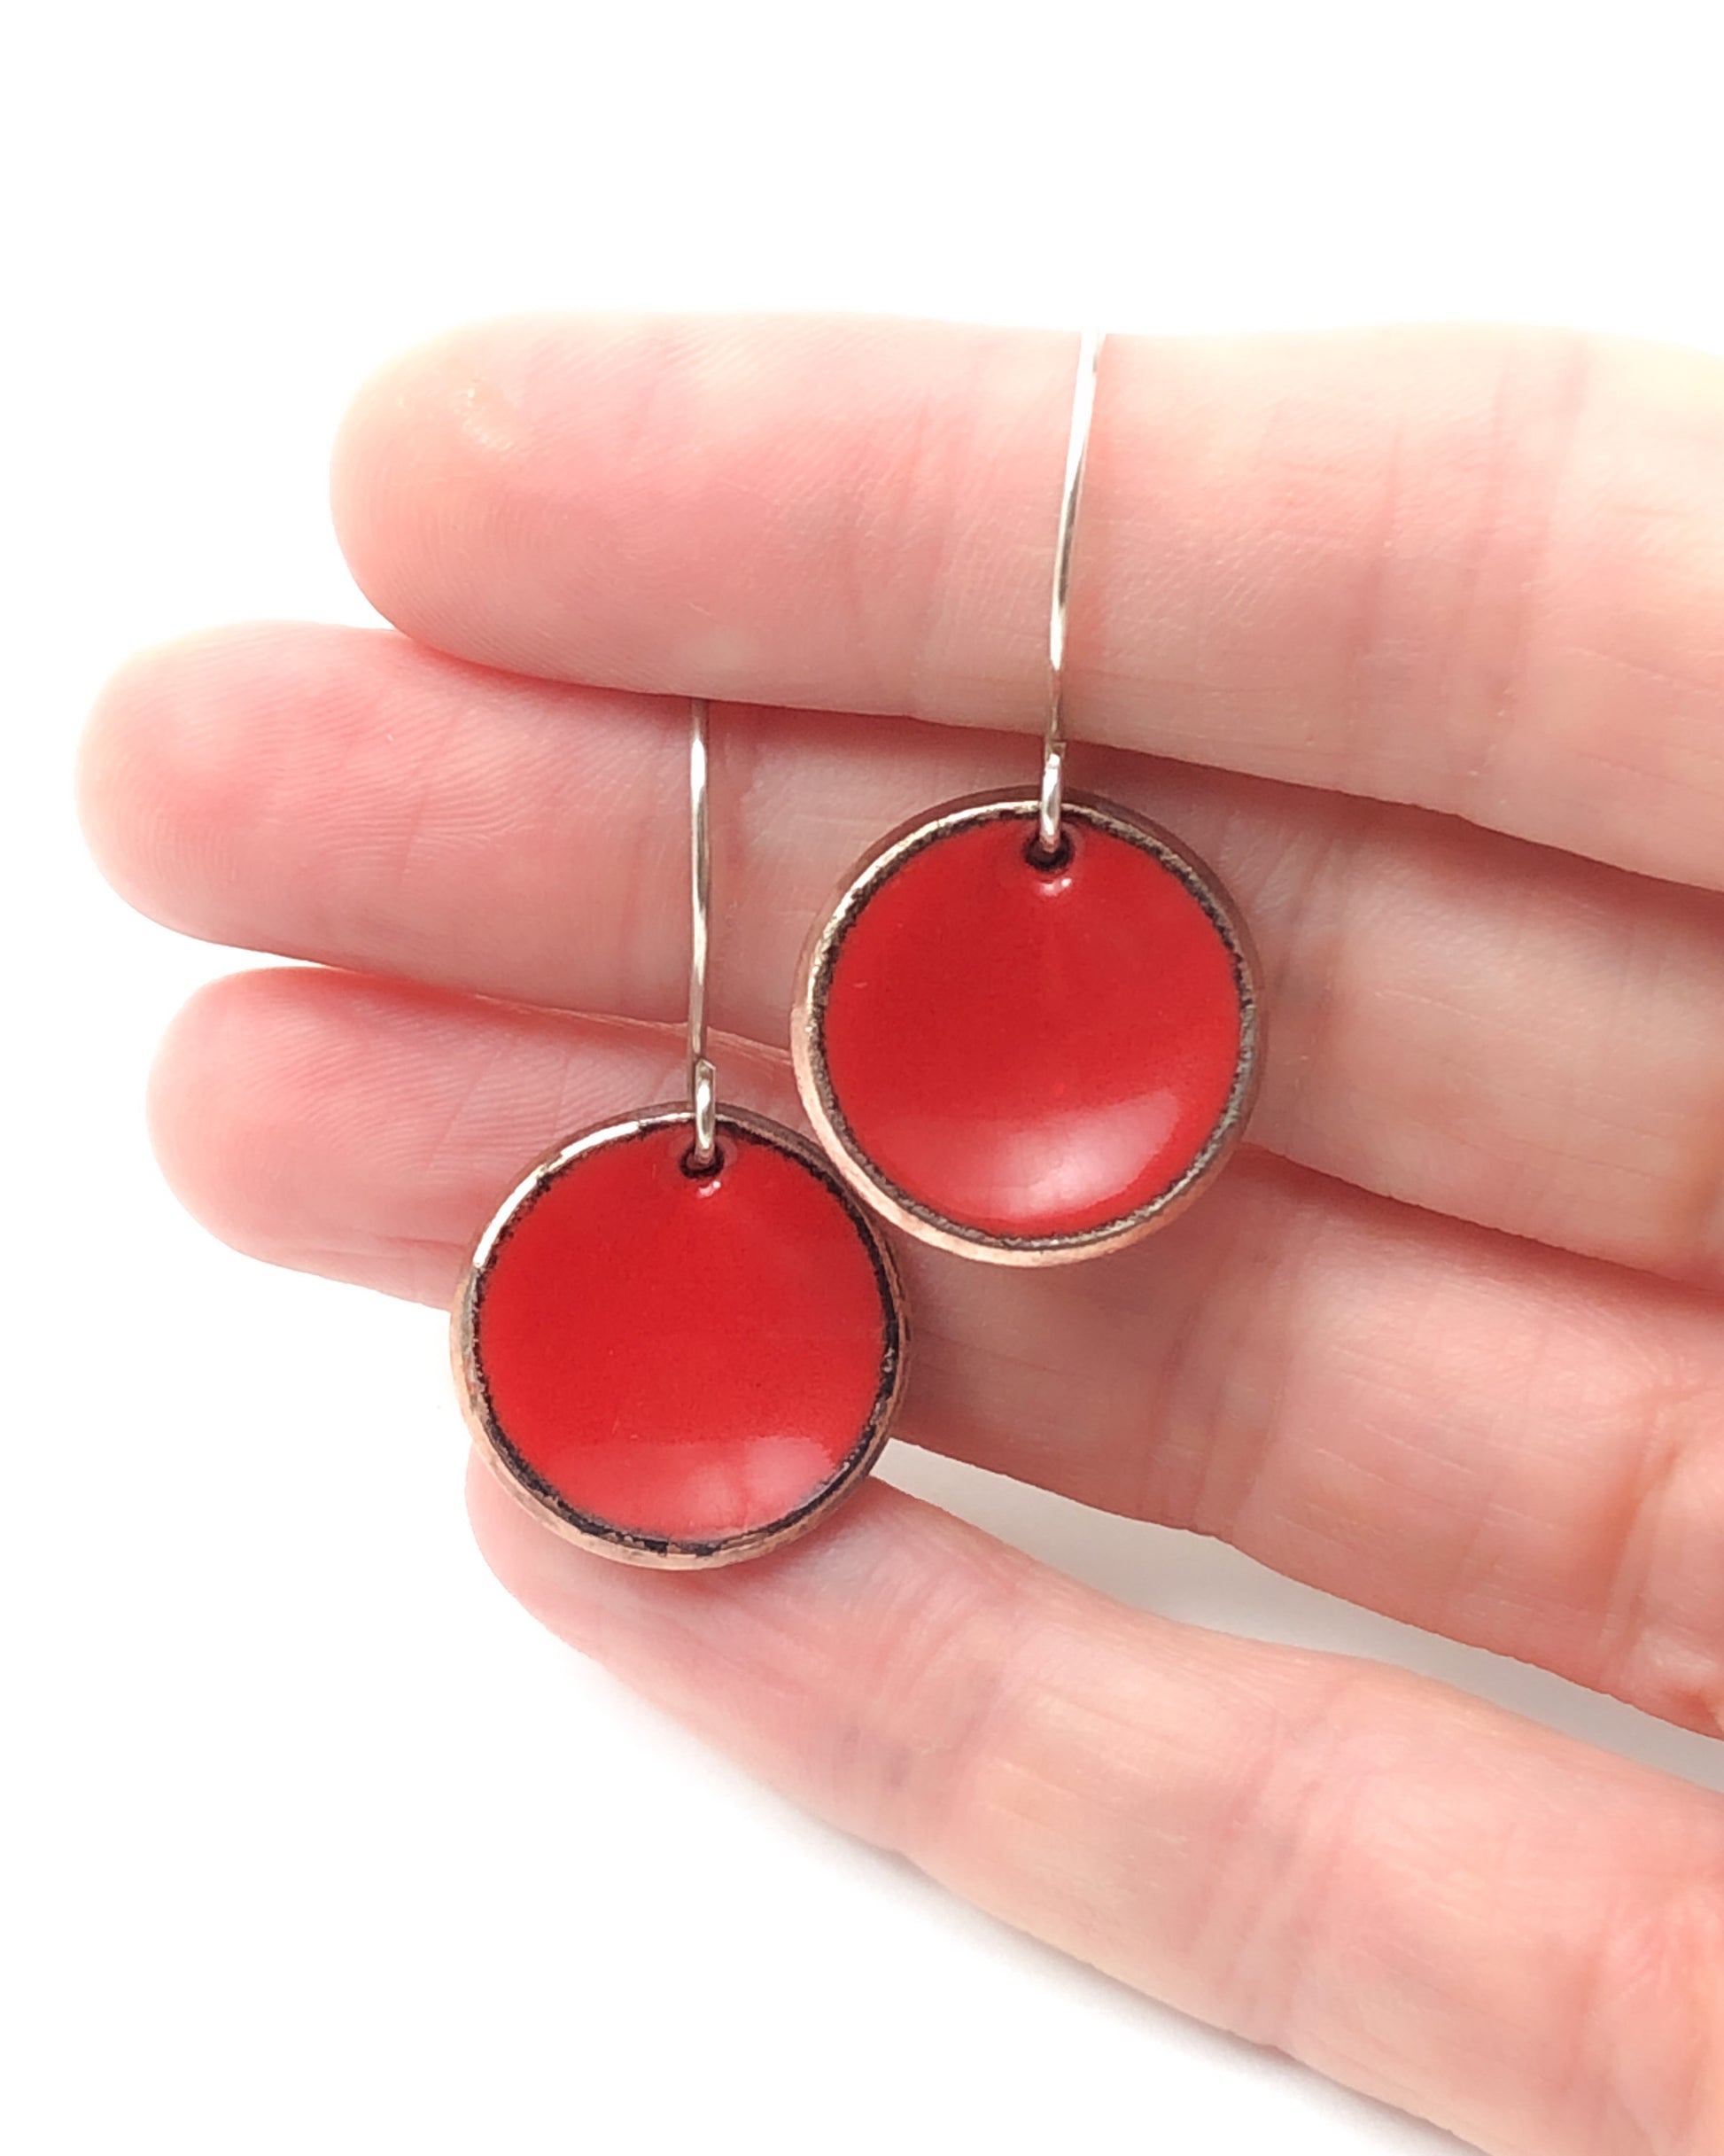 a hand holding a pair of red earrings